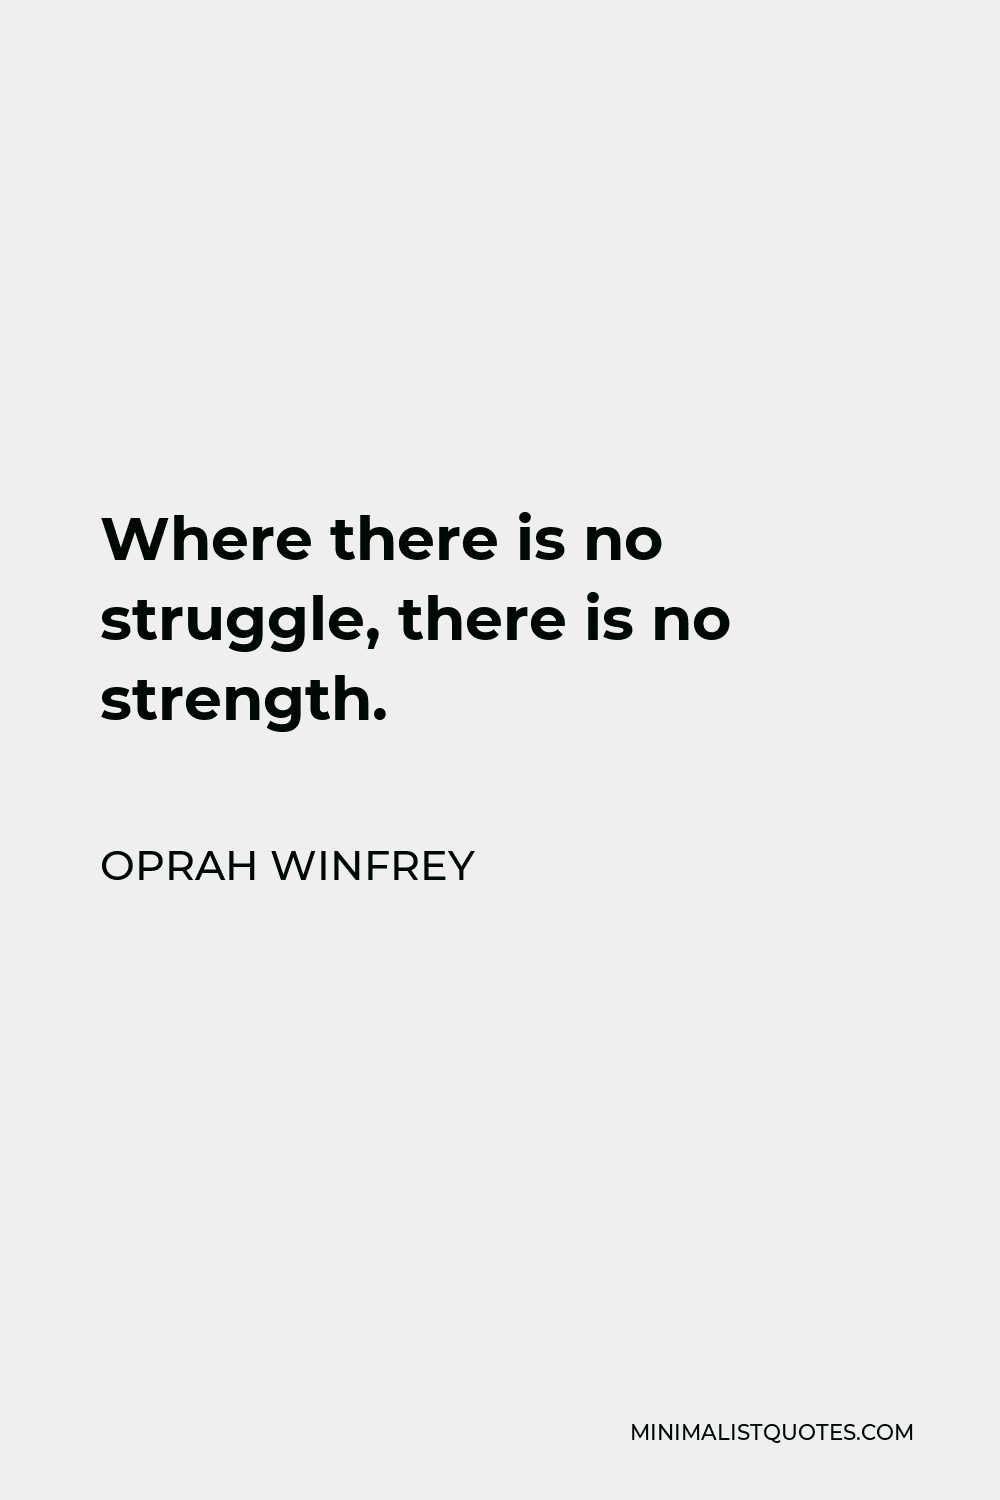 Oprah Winfrey Quote - Where there is no struggle, there is no strength.